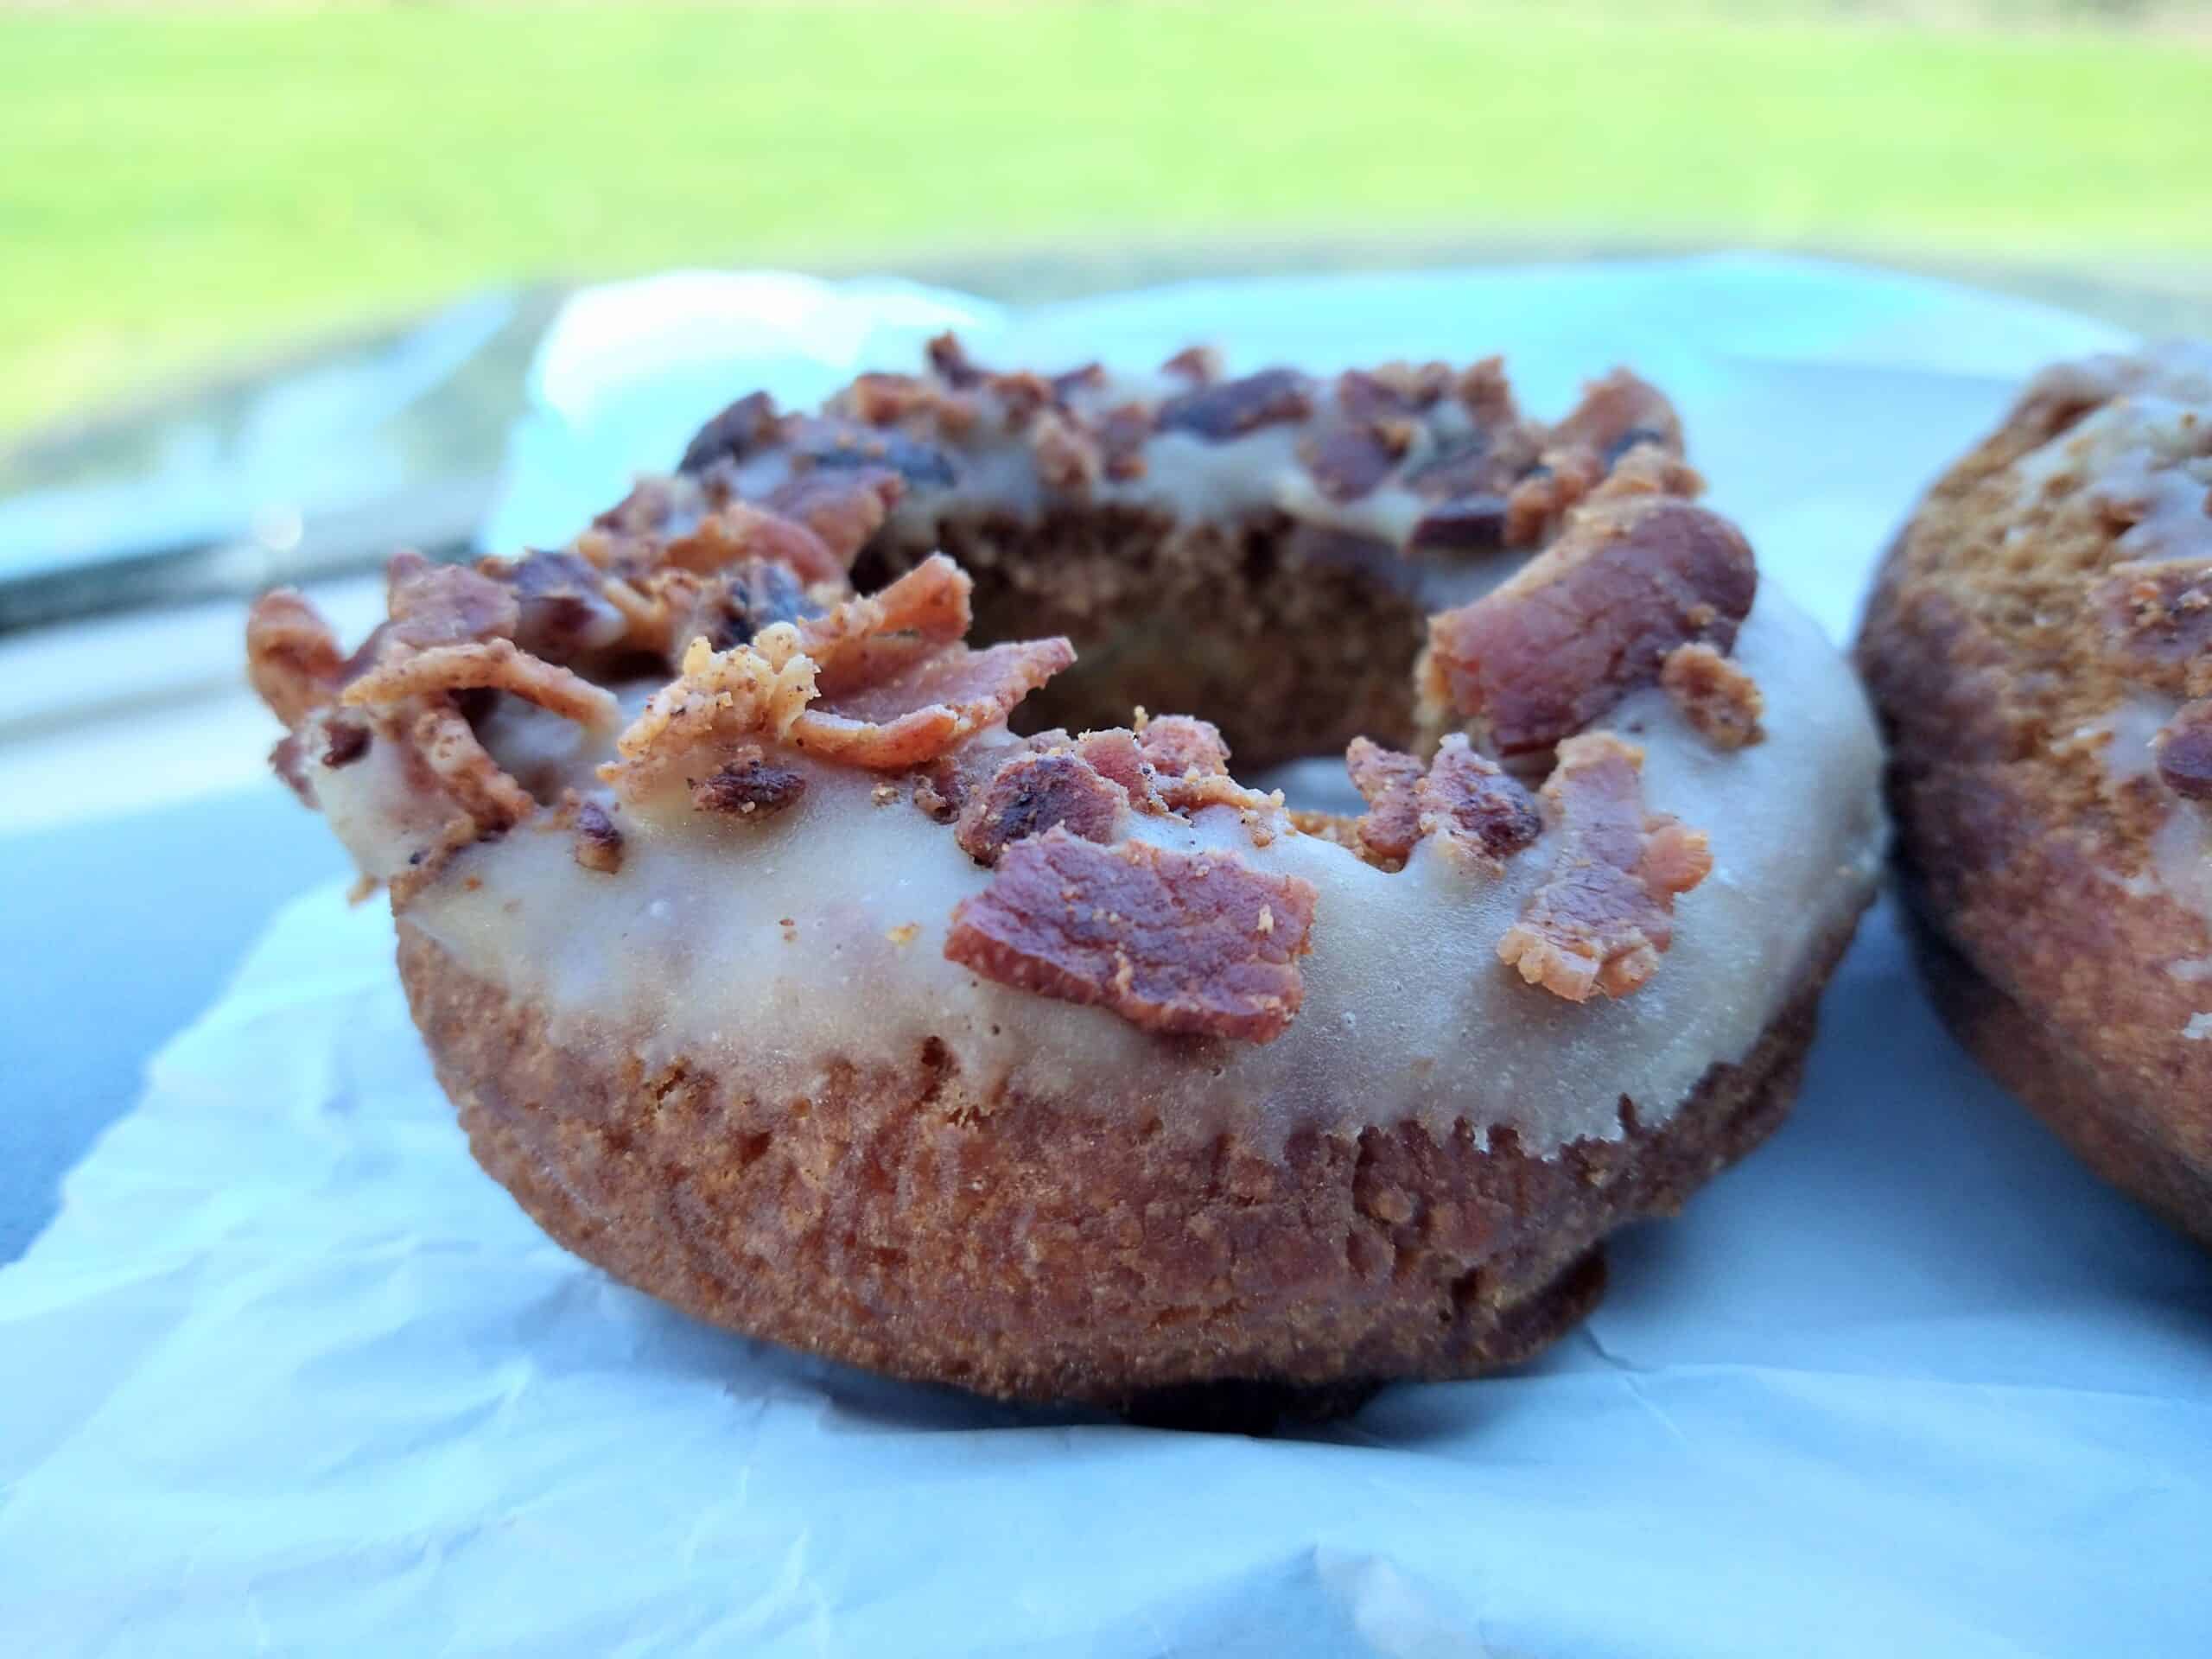 Apple cider donuts topped with bacon